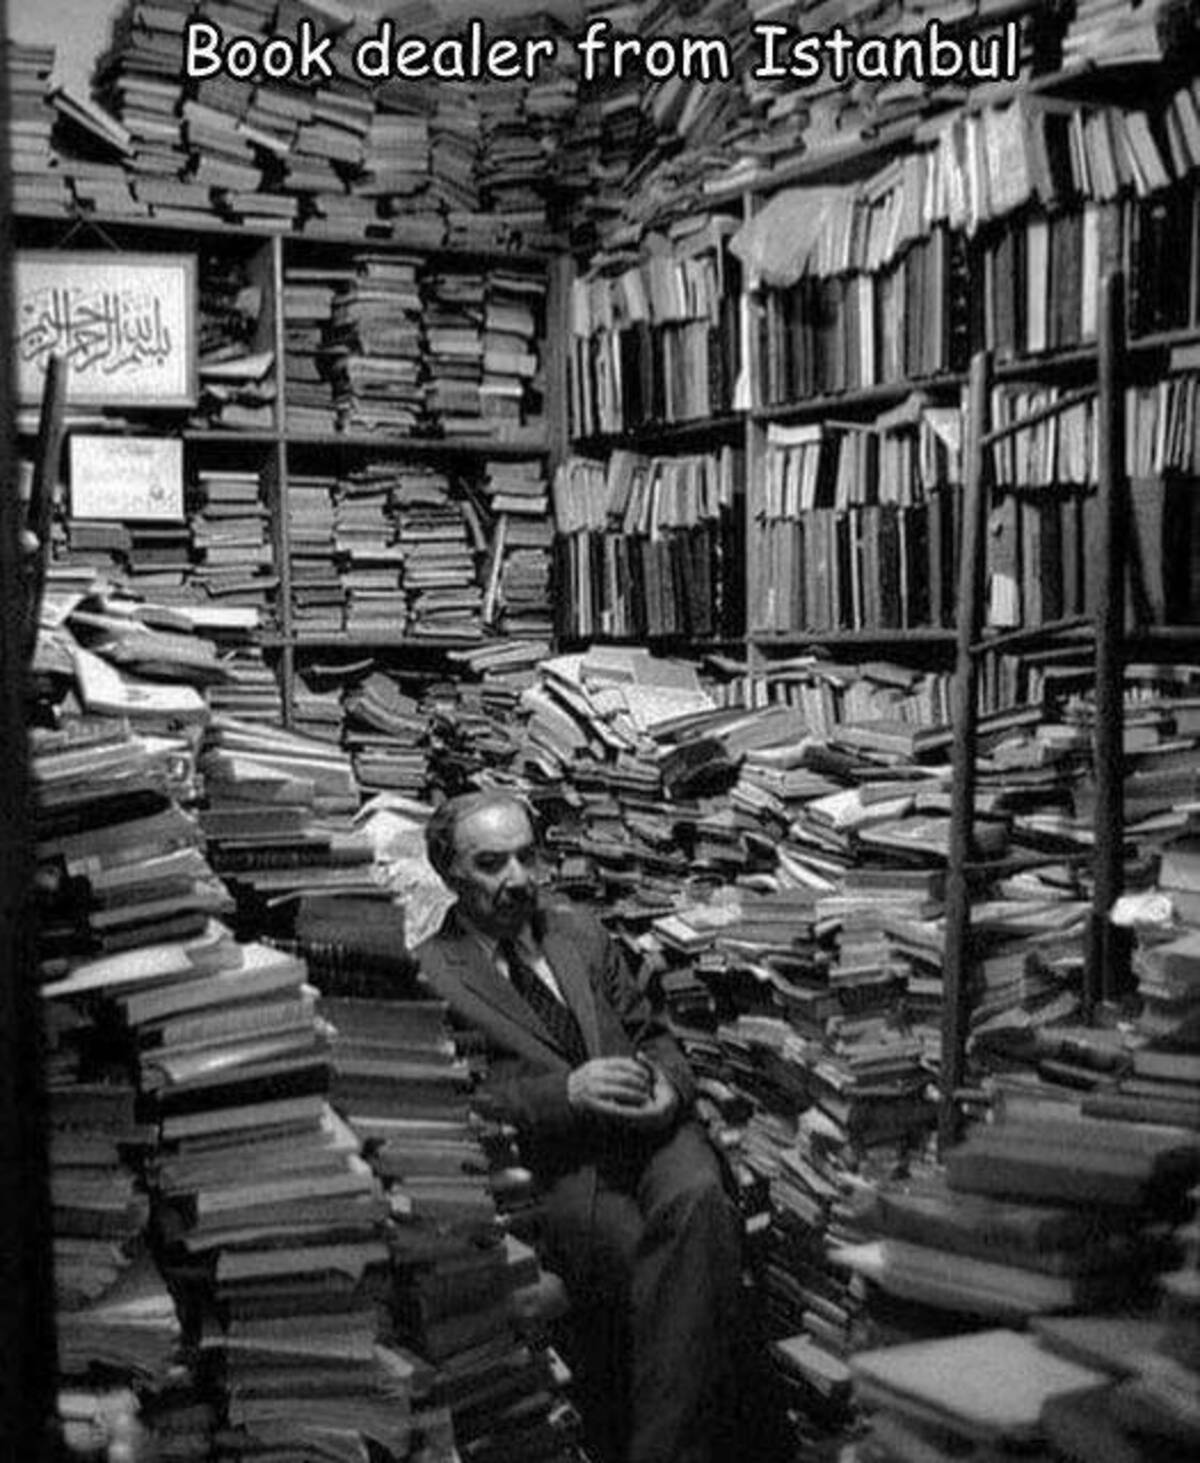 monochrome - Book dealer from Istanbul